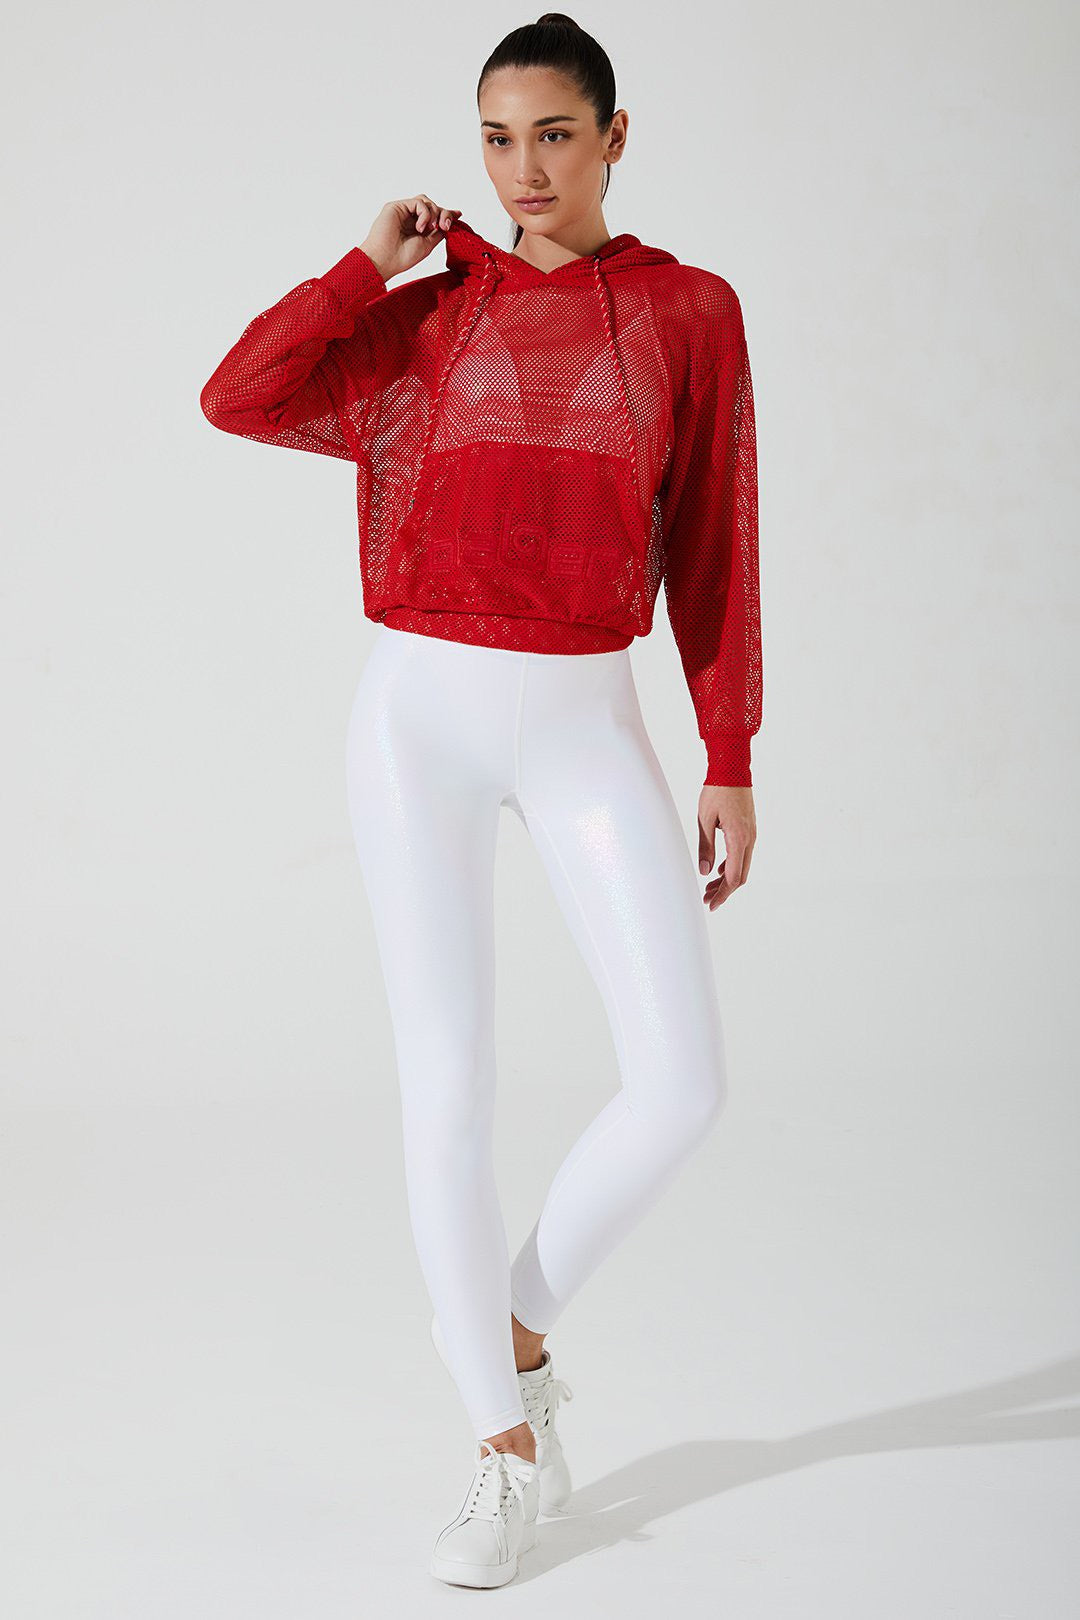 Stylish women's goji berry red hoodie with mesh design, perfect for casual fashion enthusiasts.